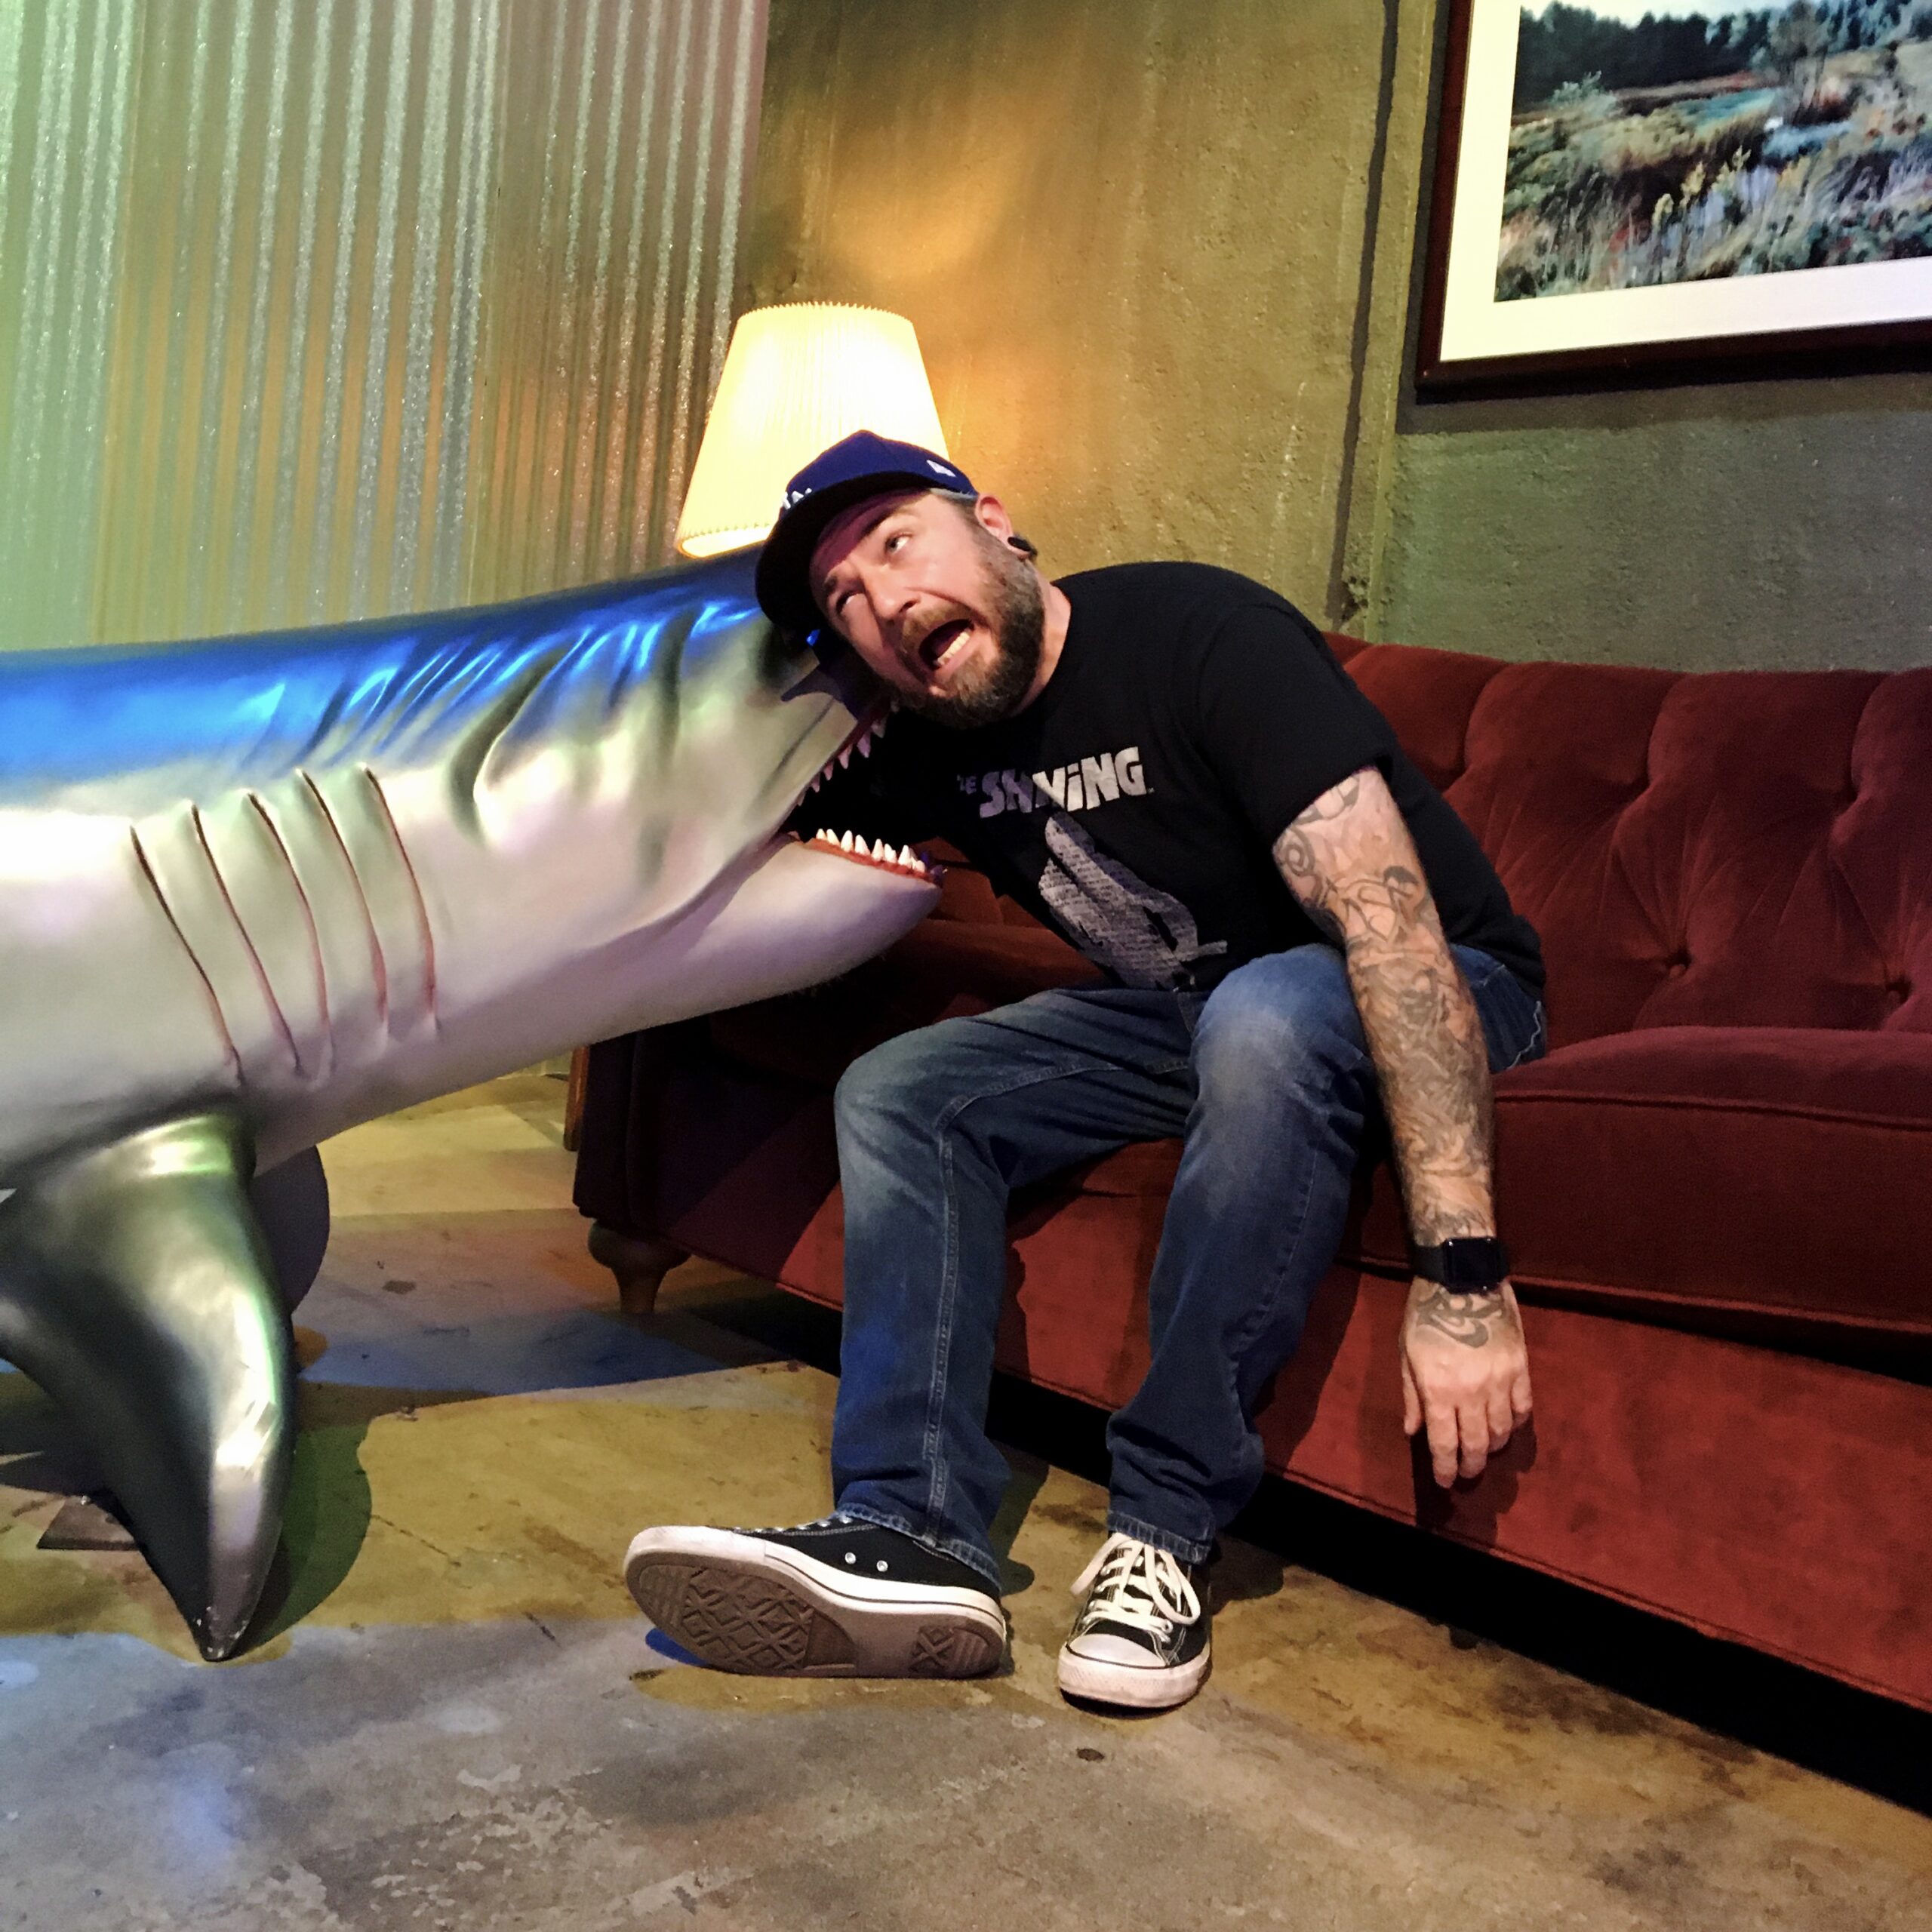 Spider Barks creator, Devin Welborn, getting chomped on by a shark in the Beetlejuice Netherworld Waiting Room of the I Like Scary Movies Experience.